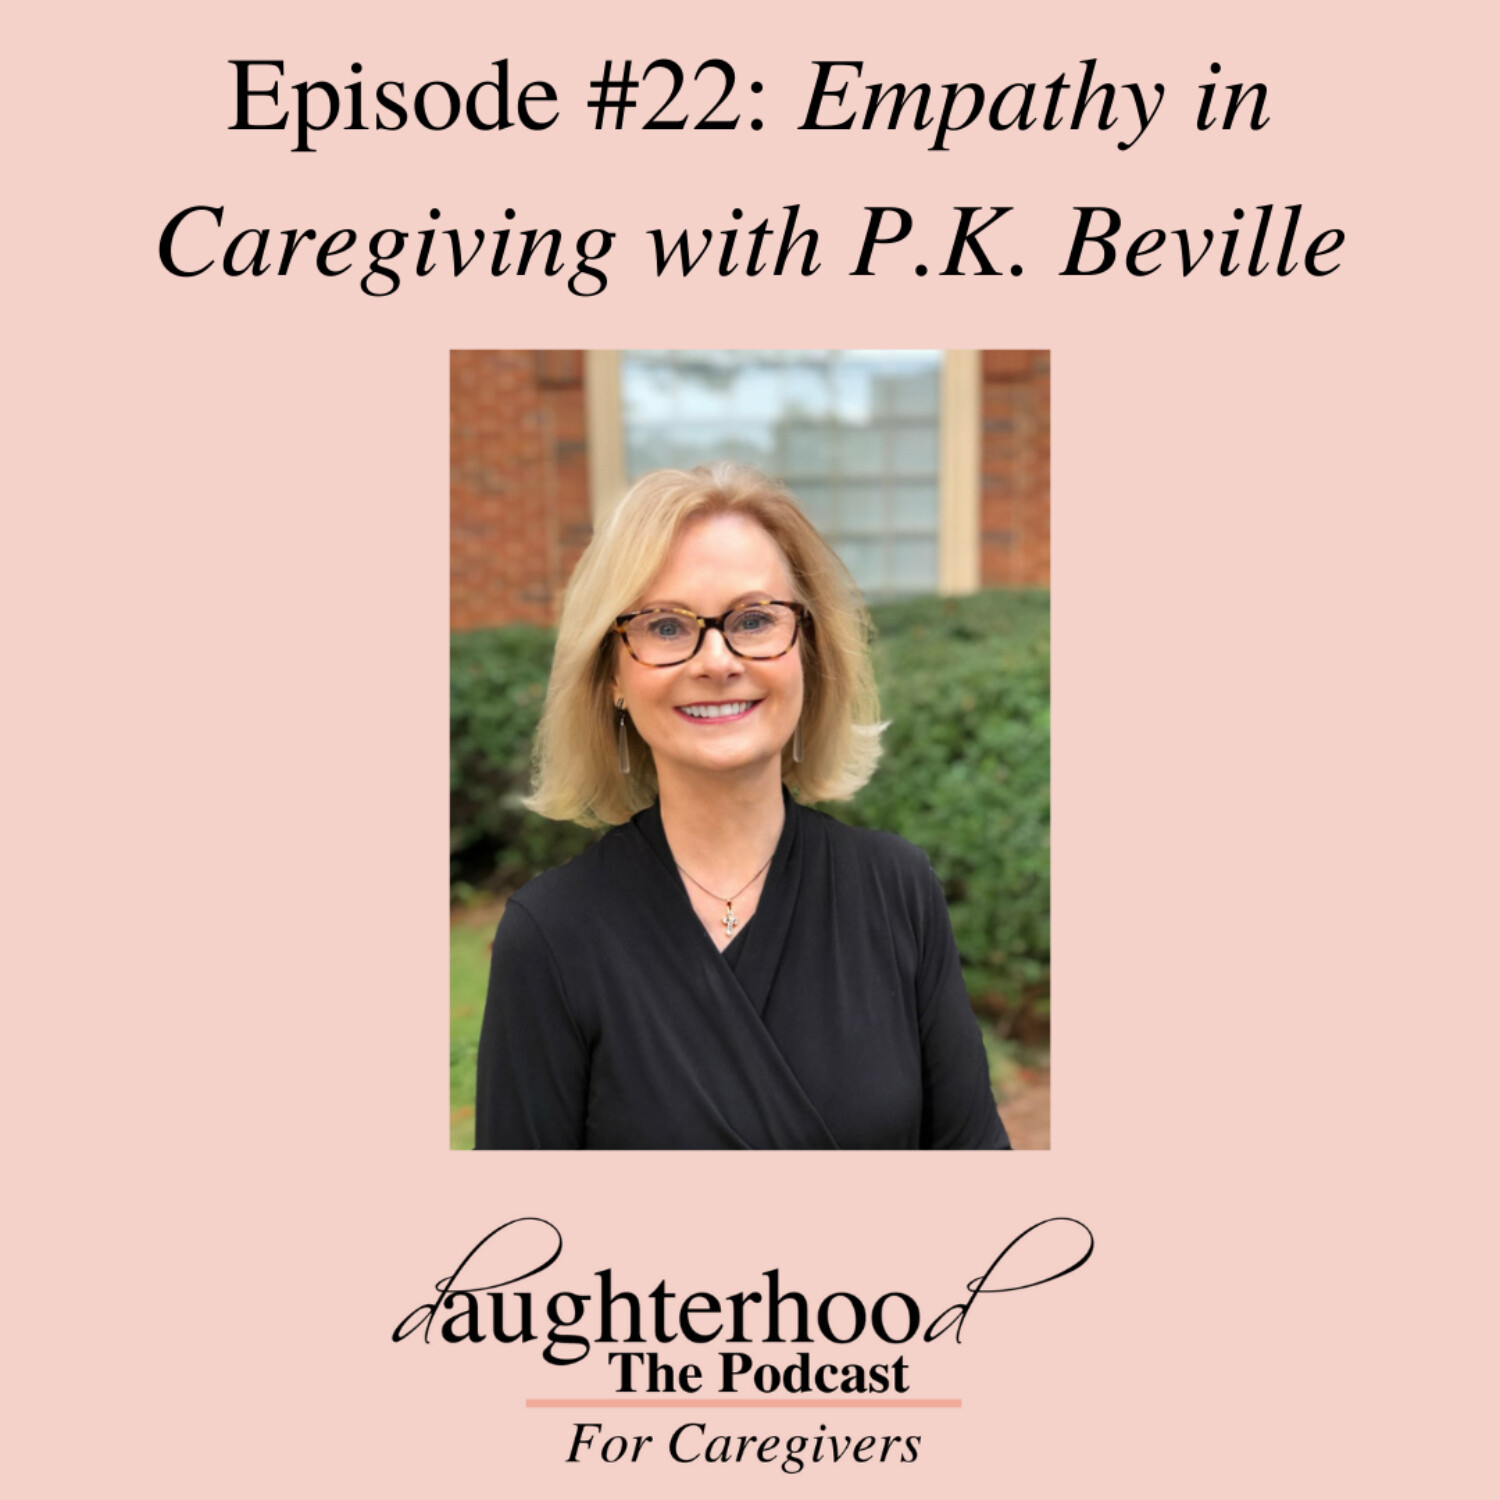 Empathy in Caregiving with PK Beville